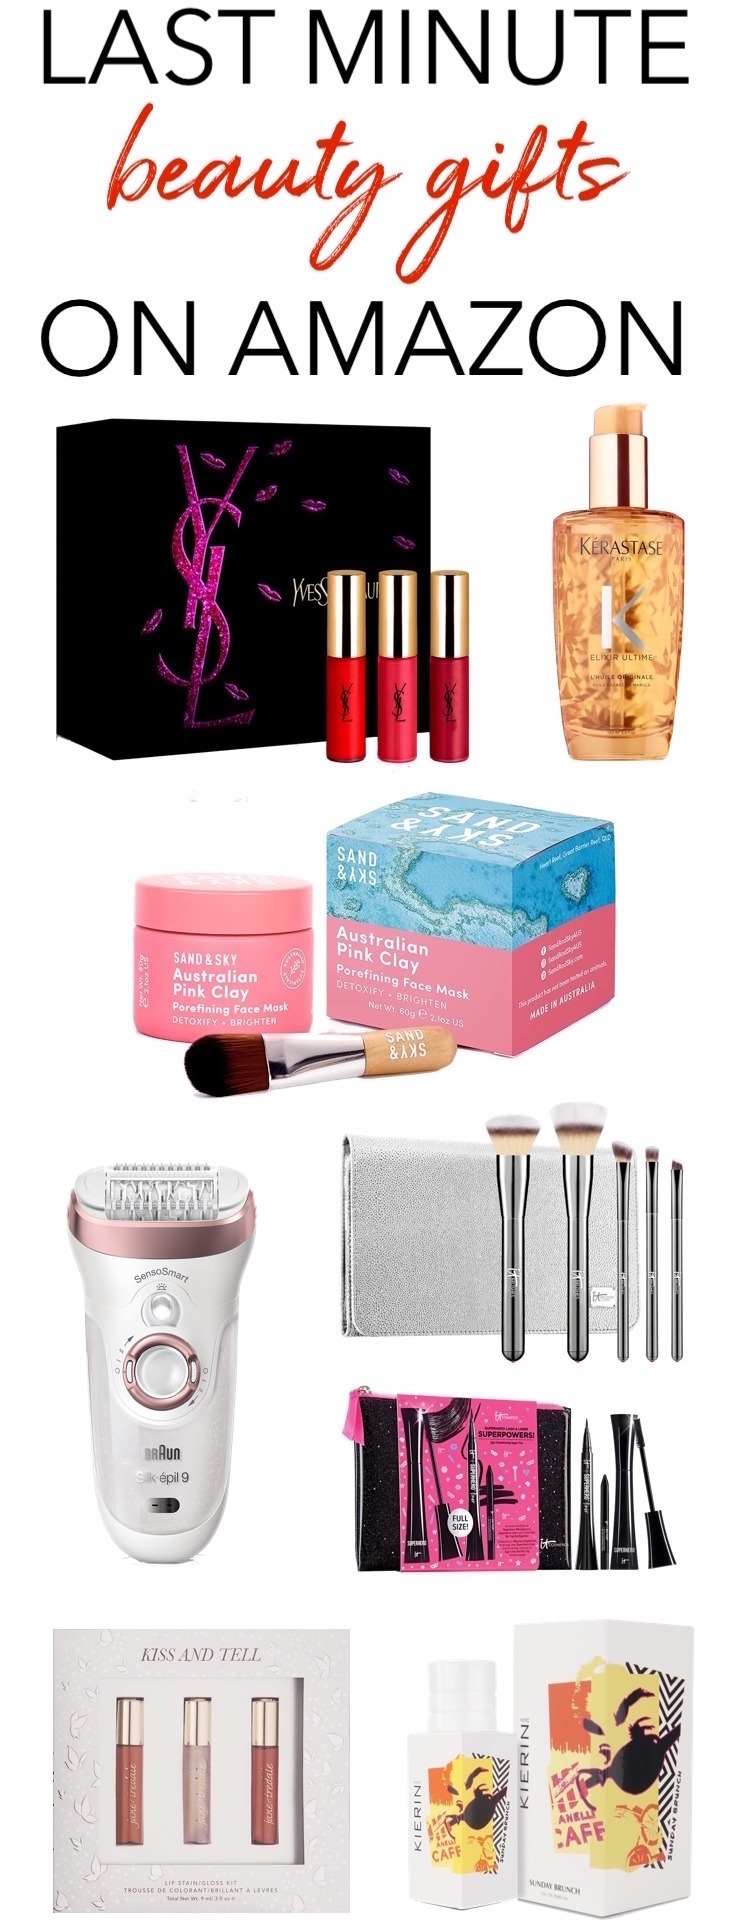  Spoil the beauties on your holiday list with these amazing beauty gifts that are easily available on Amazon! 